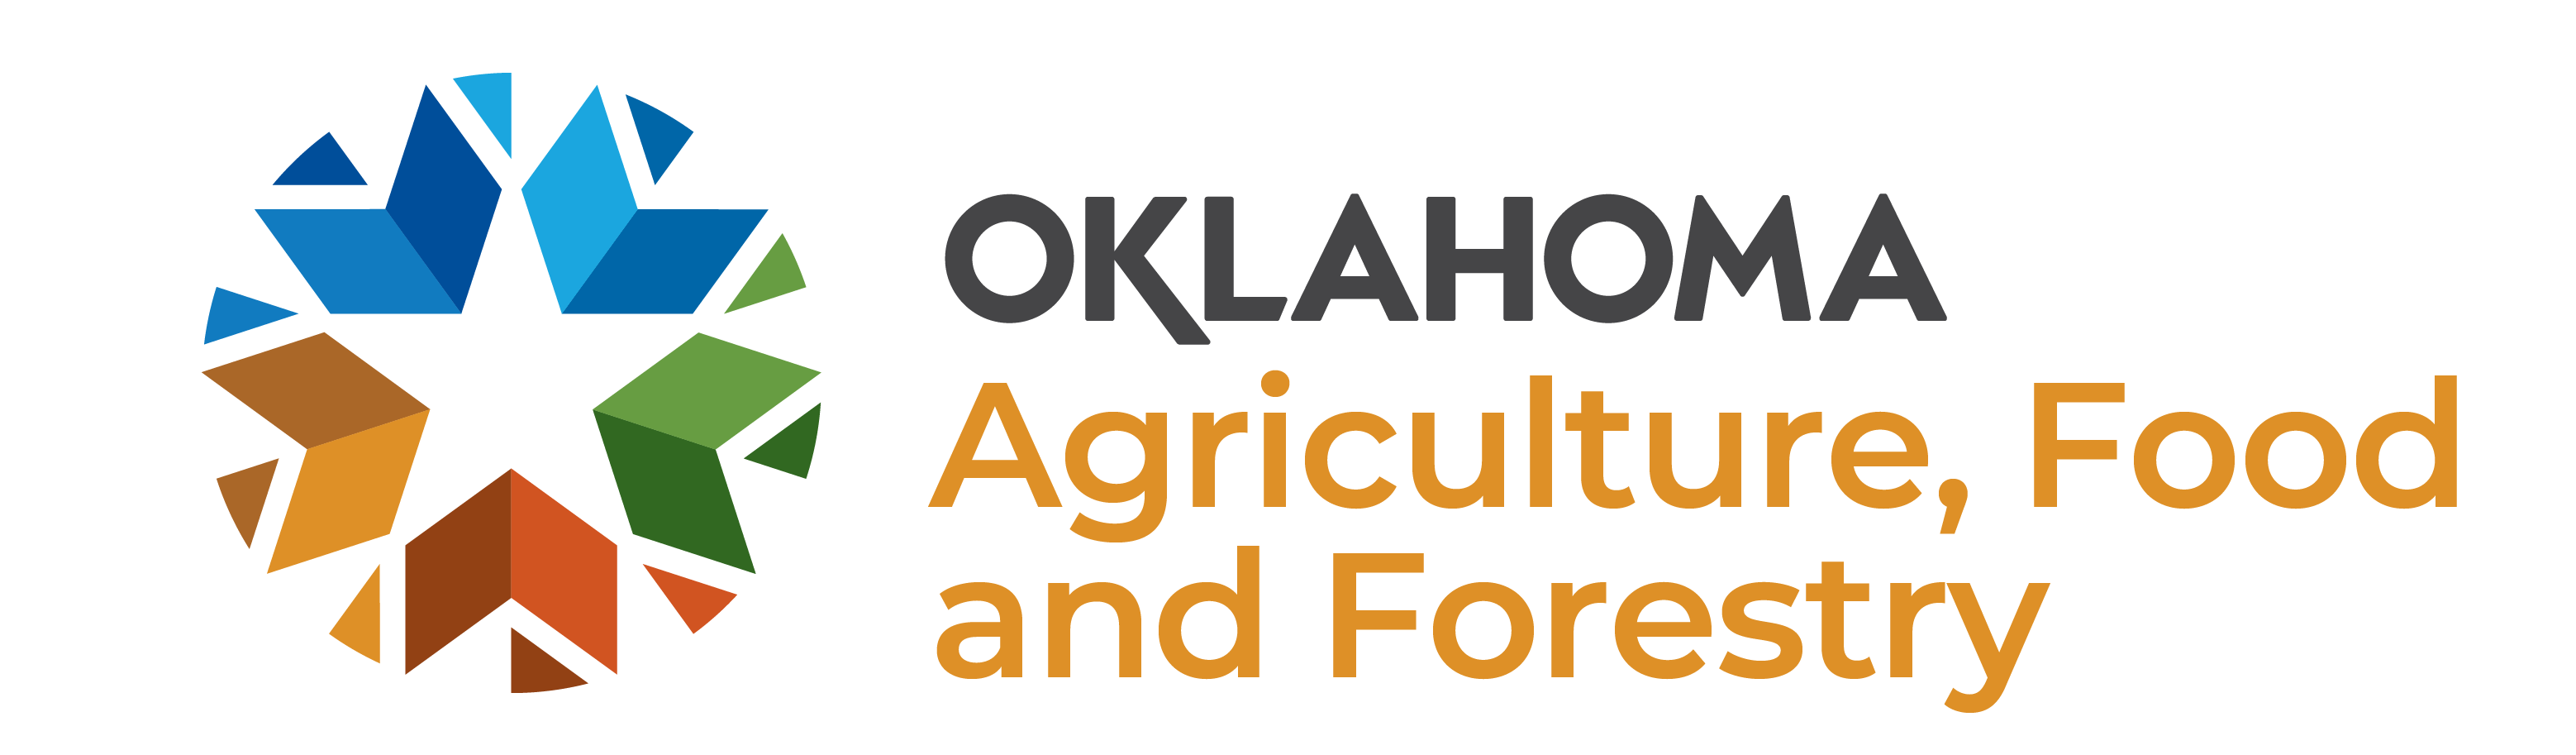 Oklahoma Agriculture Food and Forestry logo.